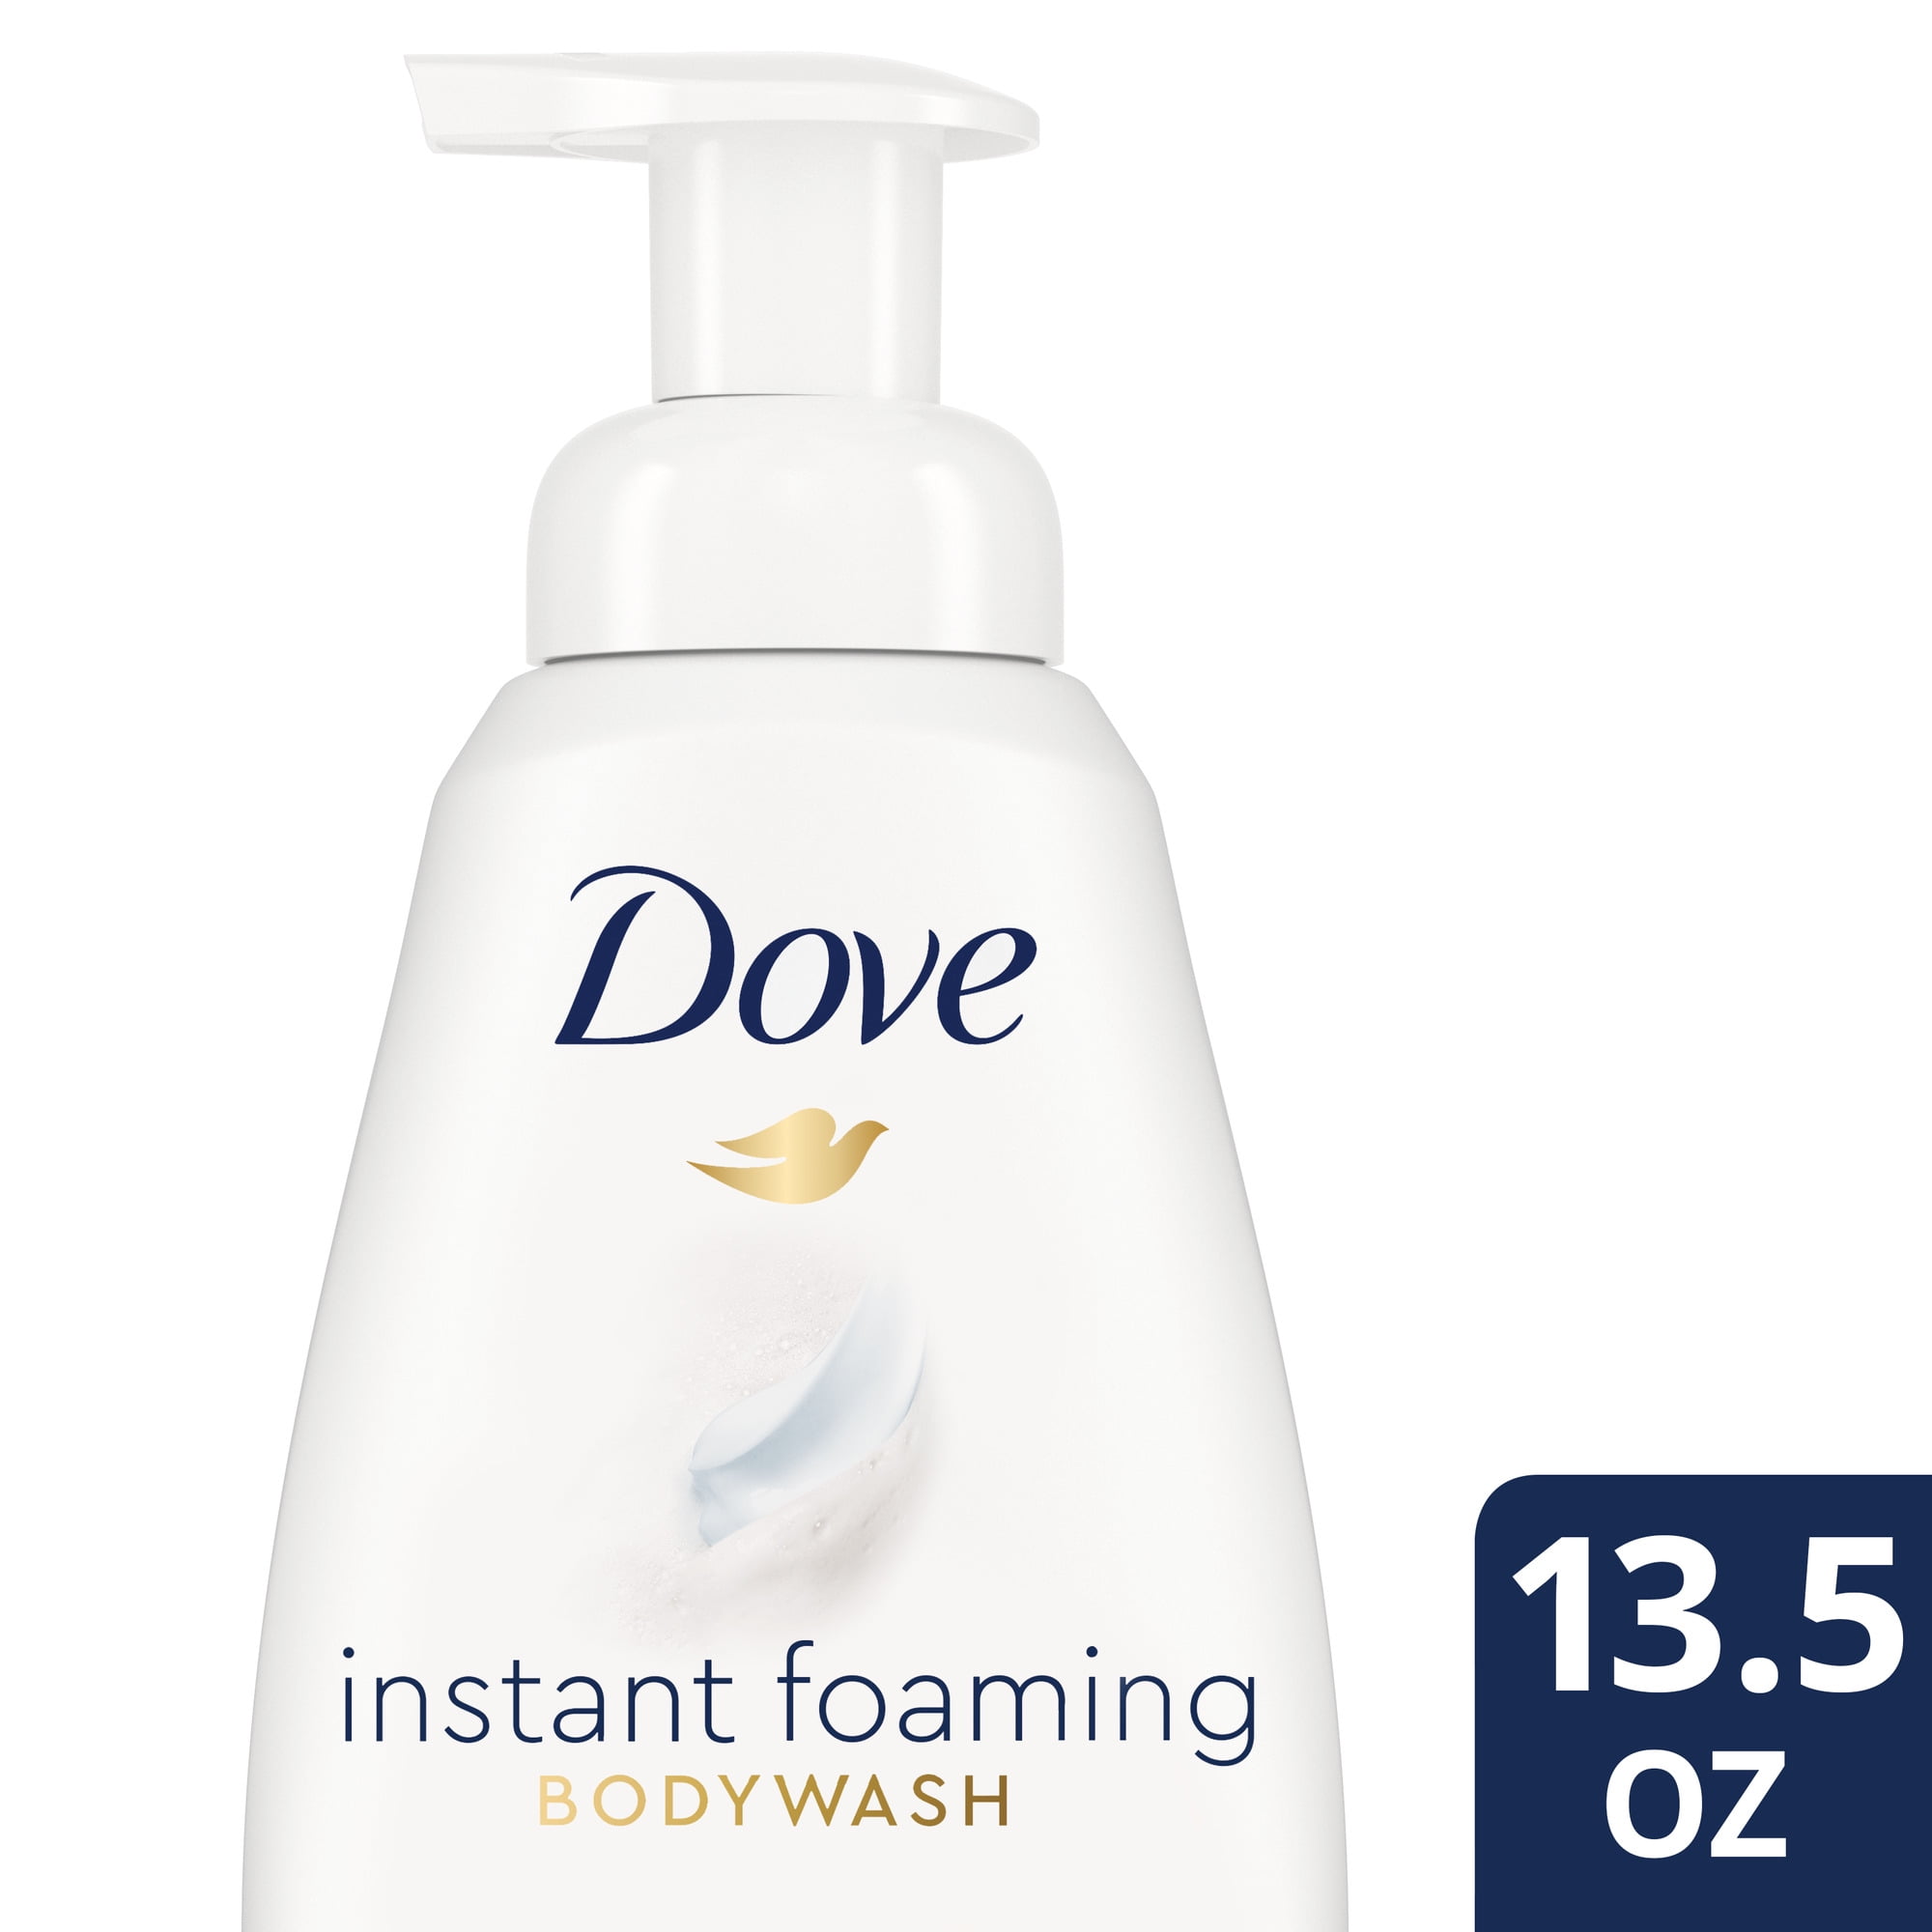 Dove Instant Foaming Body Wash Deep Moisture Cleanser That Effectively Washes Away Bacteria While Nourishing Your Skin for Soft, Smooth Skin 13.5 oz